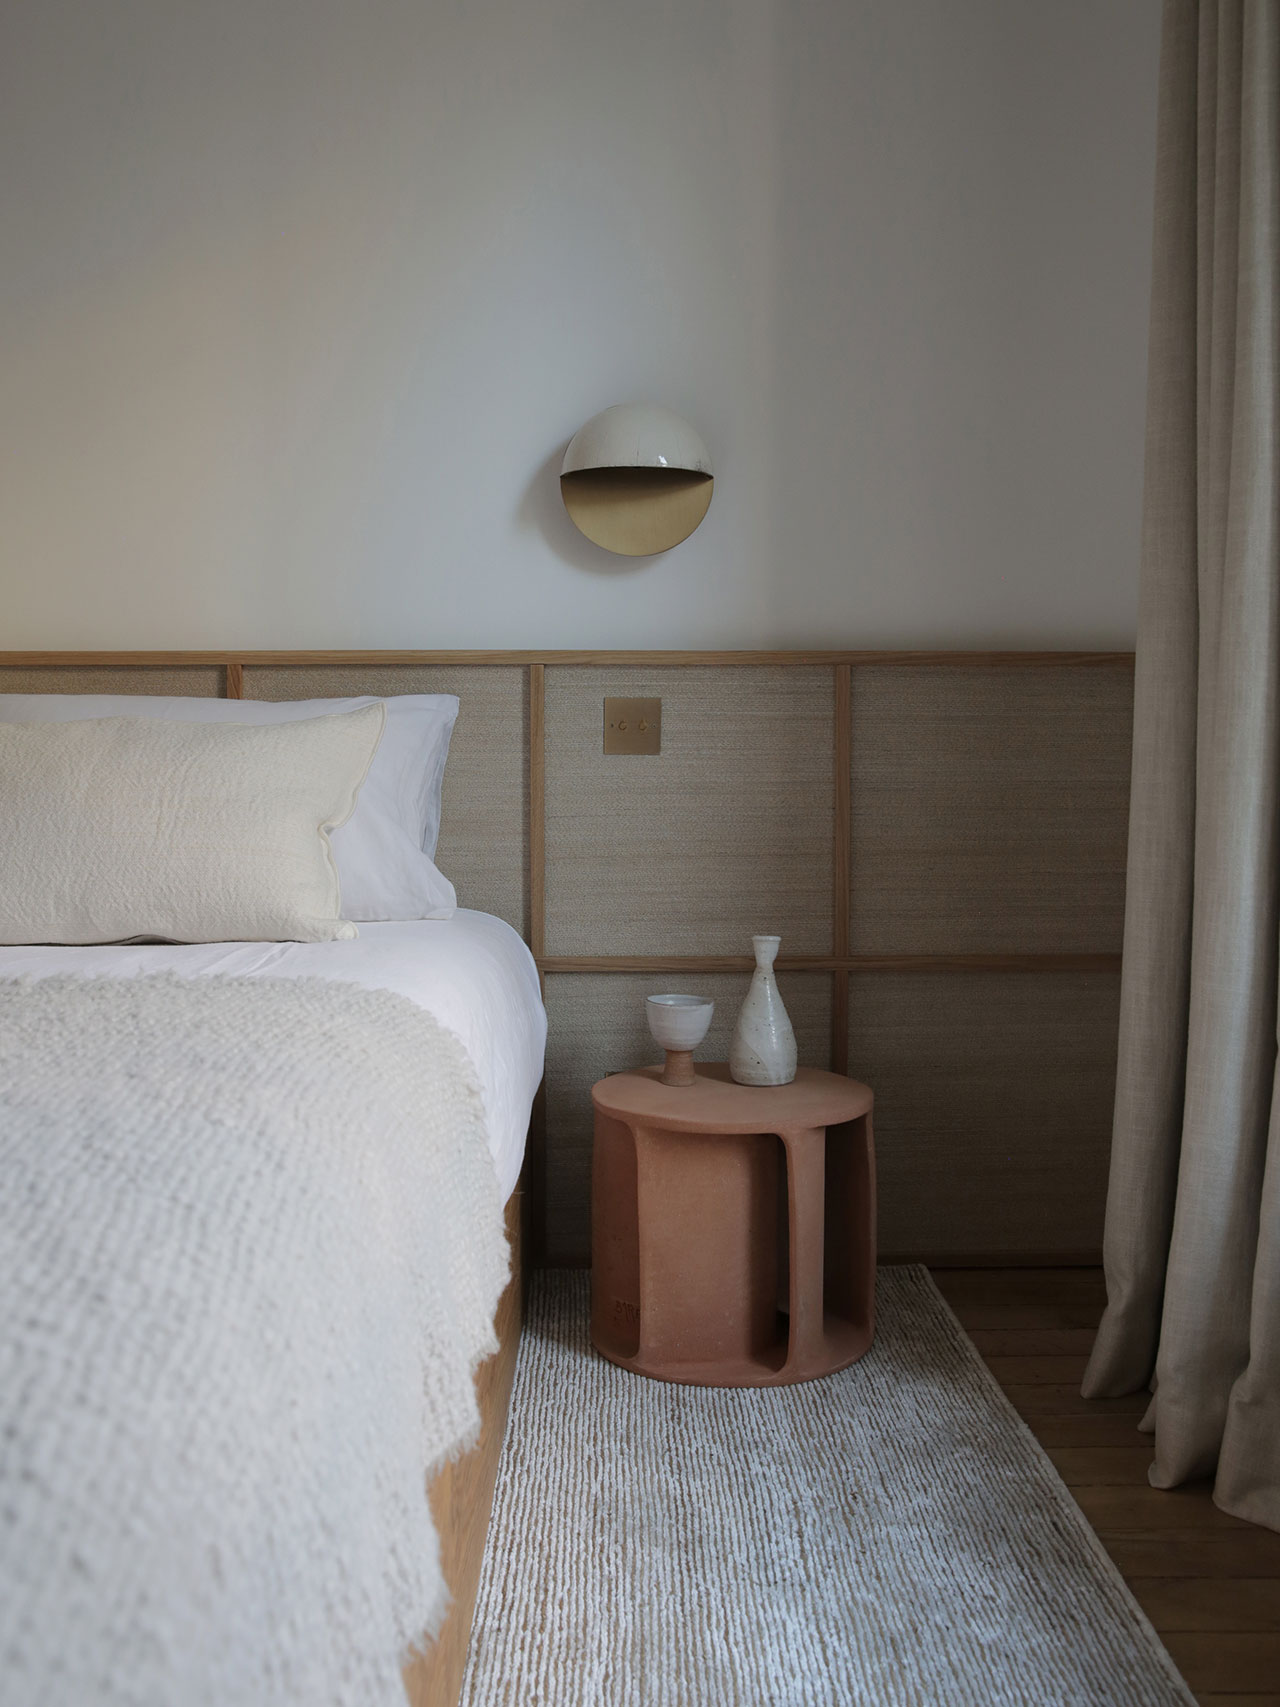 Bedhead in oak and thin rattan wallpaper by Emmanuelle Simon.
Sconce in raku and brass by Emmanuelle Simon.
Illuminated side table in in earthware by Guy Bareff.
Photography by Damien de Medeiros.